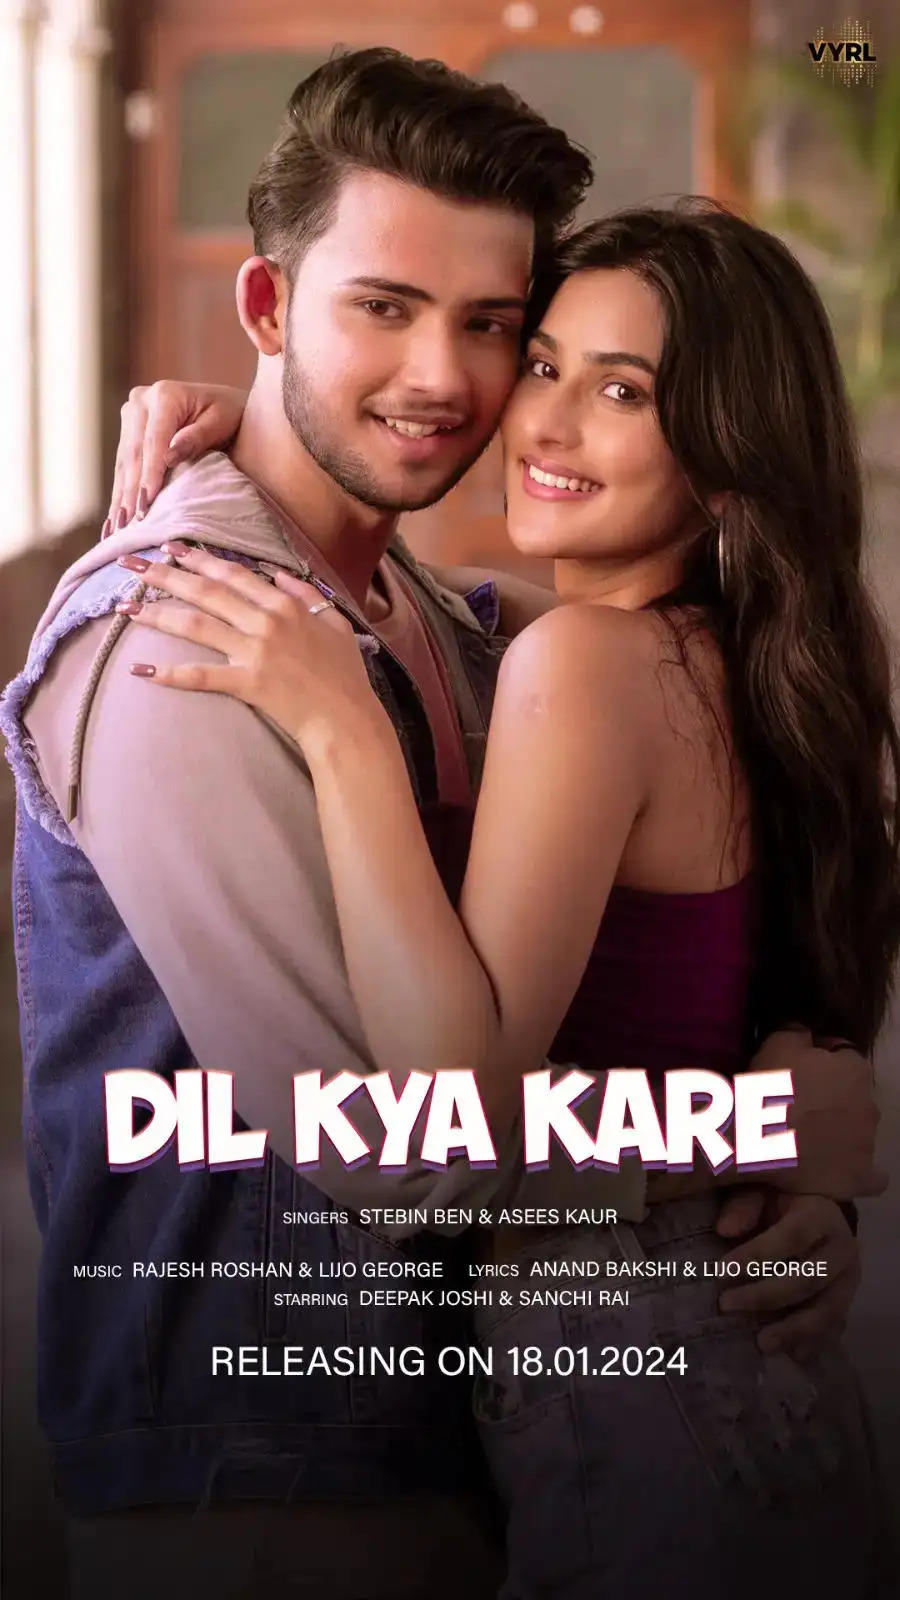 VYRL Originals kickstarts 2024 with the release of “Dil Kya Kare" - A Heartfelt Reimagination of a Timeless Classic